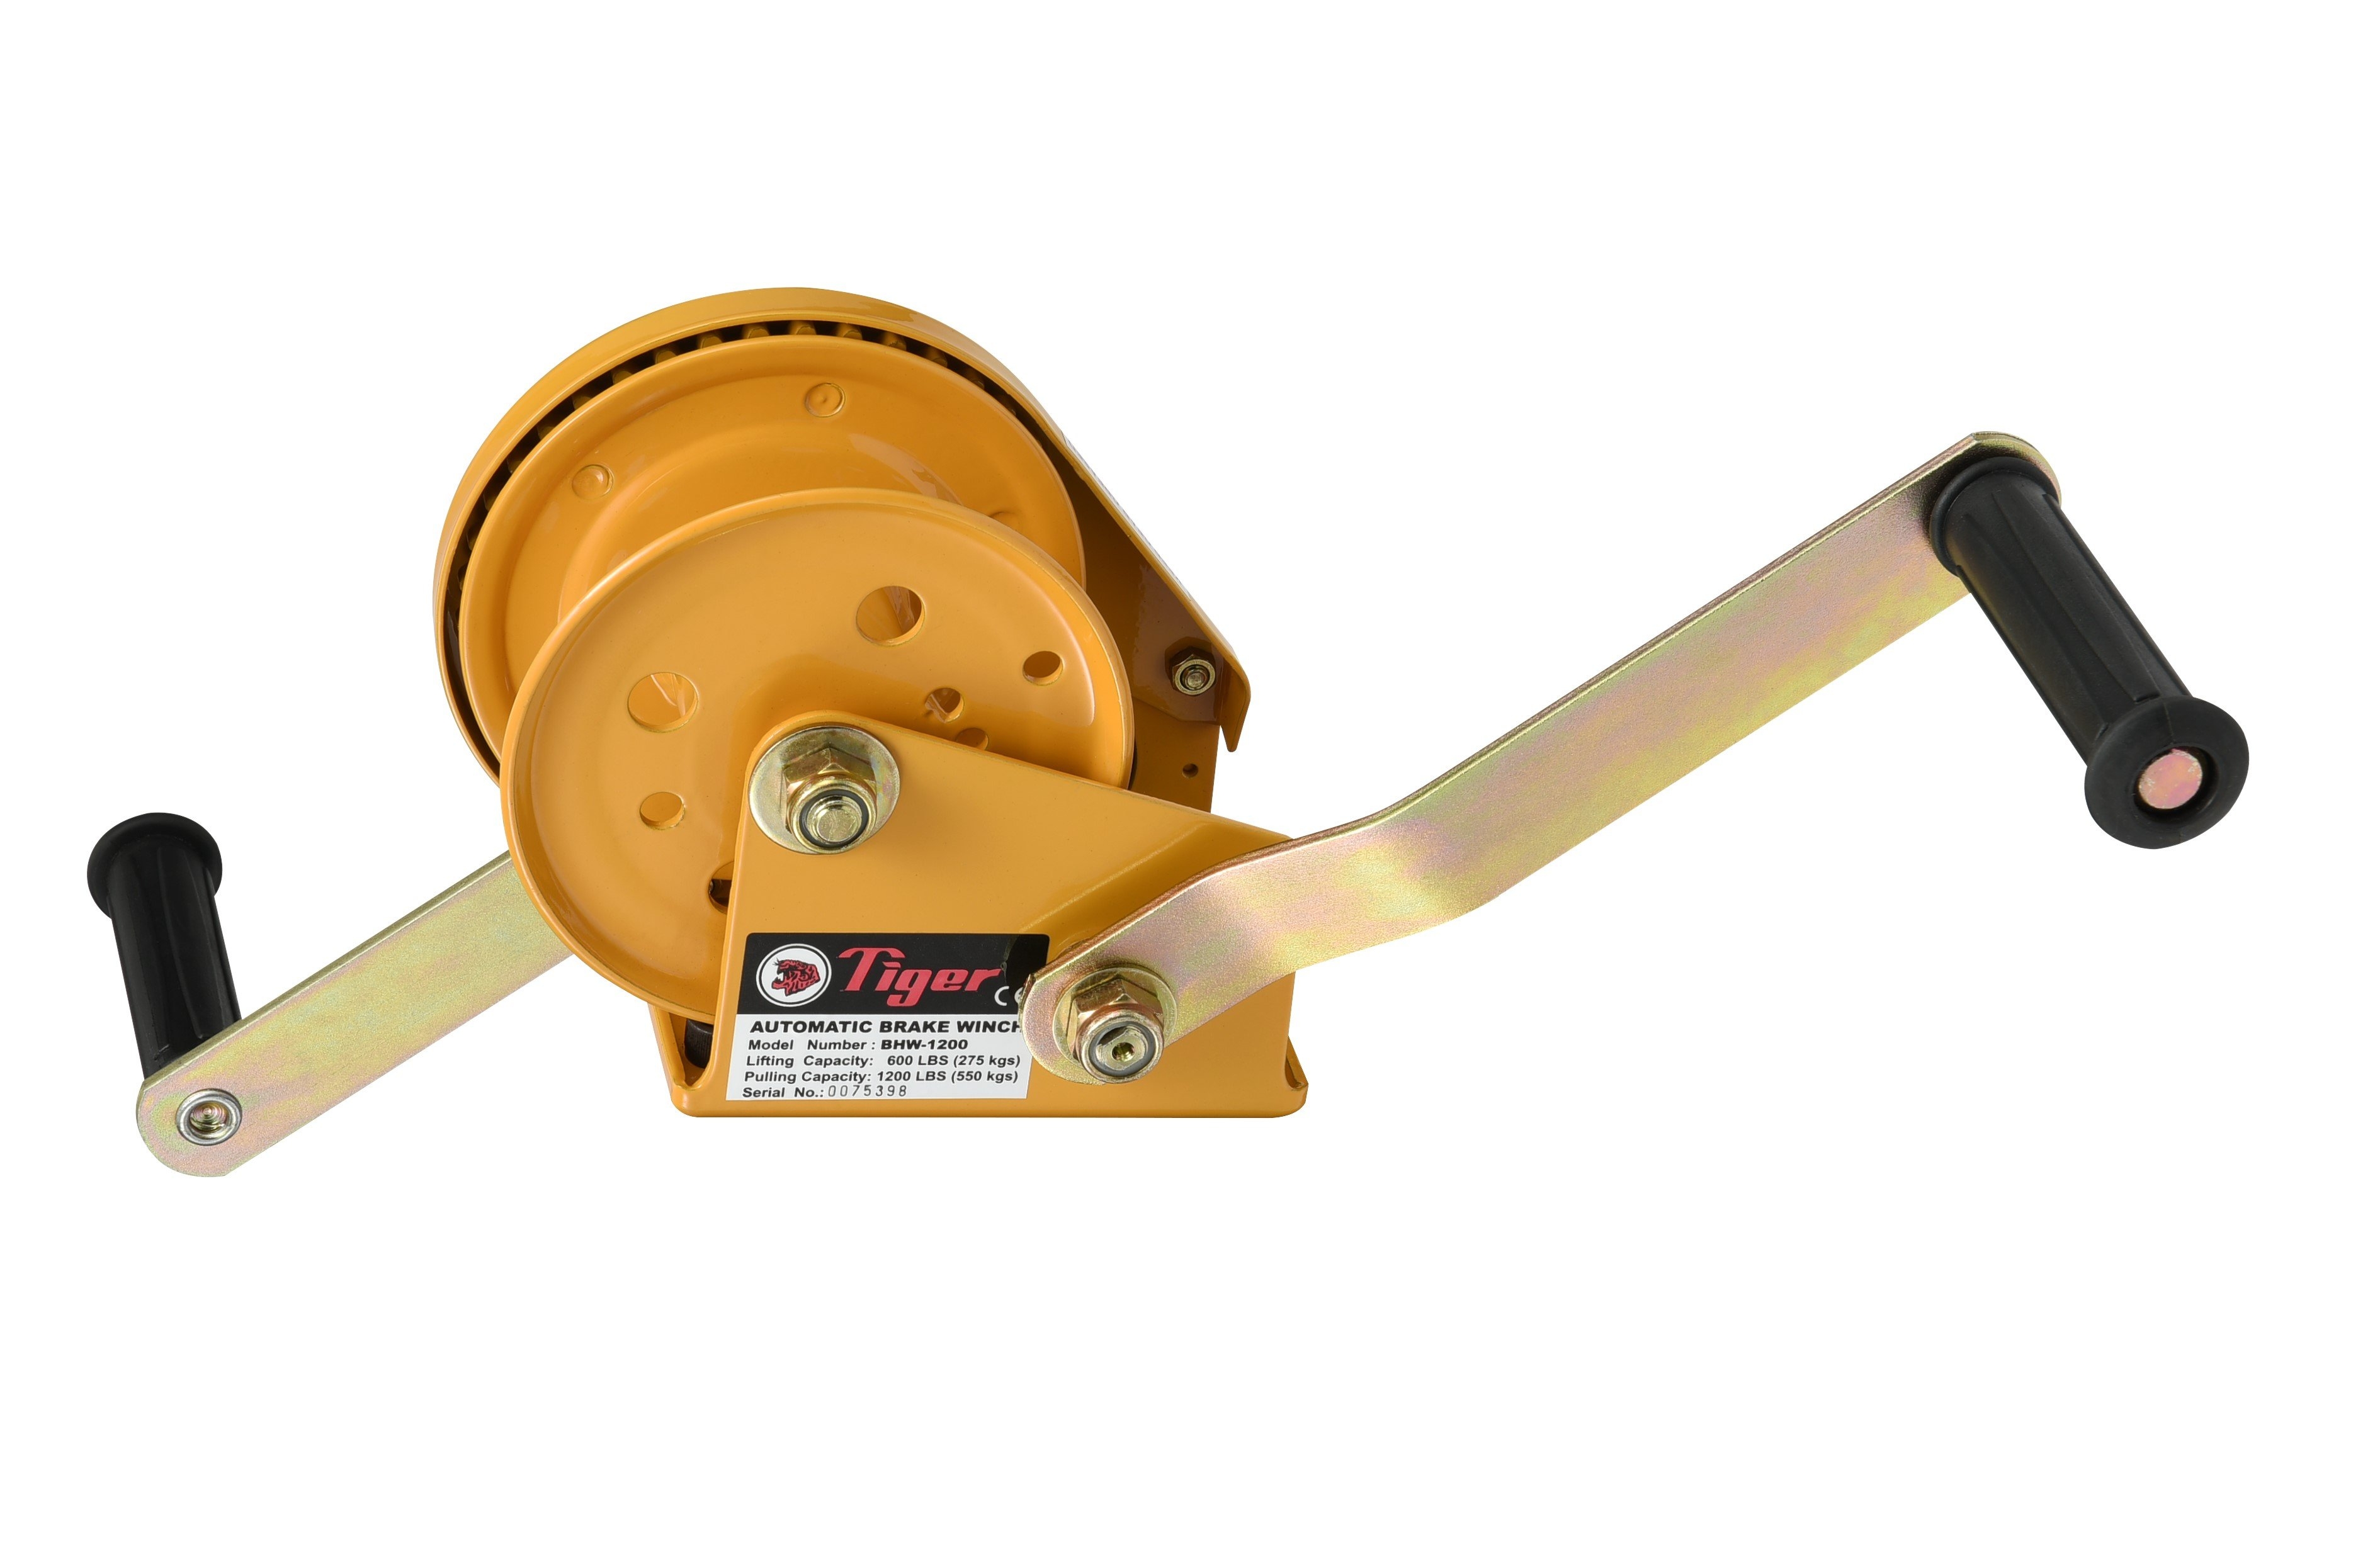 Tiger Brake Hand Winch For Pulling Or Hoisting (Single Or Dual Handle Option) – Brake Hand Winch 550kg (Dual Handle ) 158.1.4 – Brake Winch – Yellow – Steel